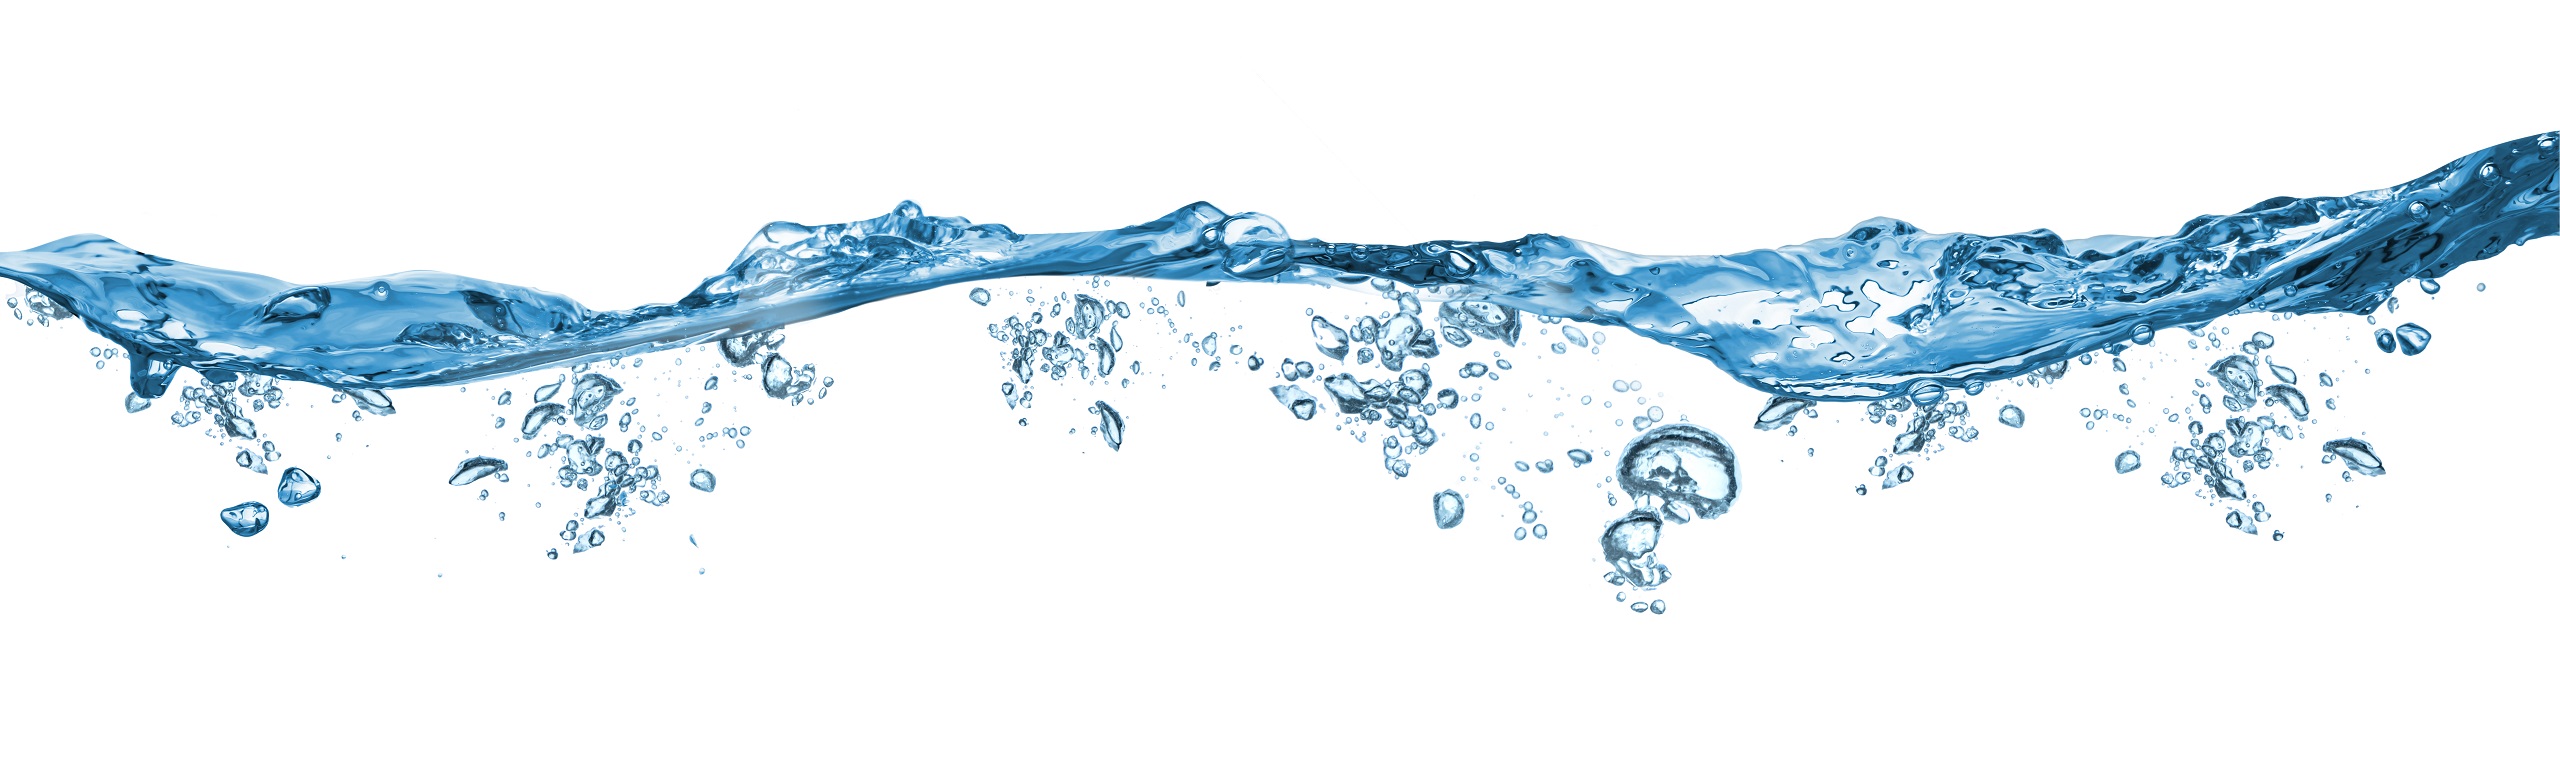 Fresh blue natural alkaline ionized drink water wave as a wide panorama with bubbles concept isolated on a white background.